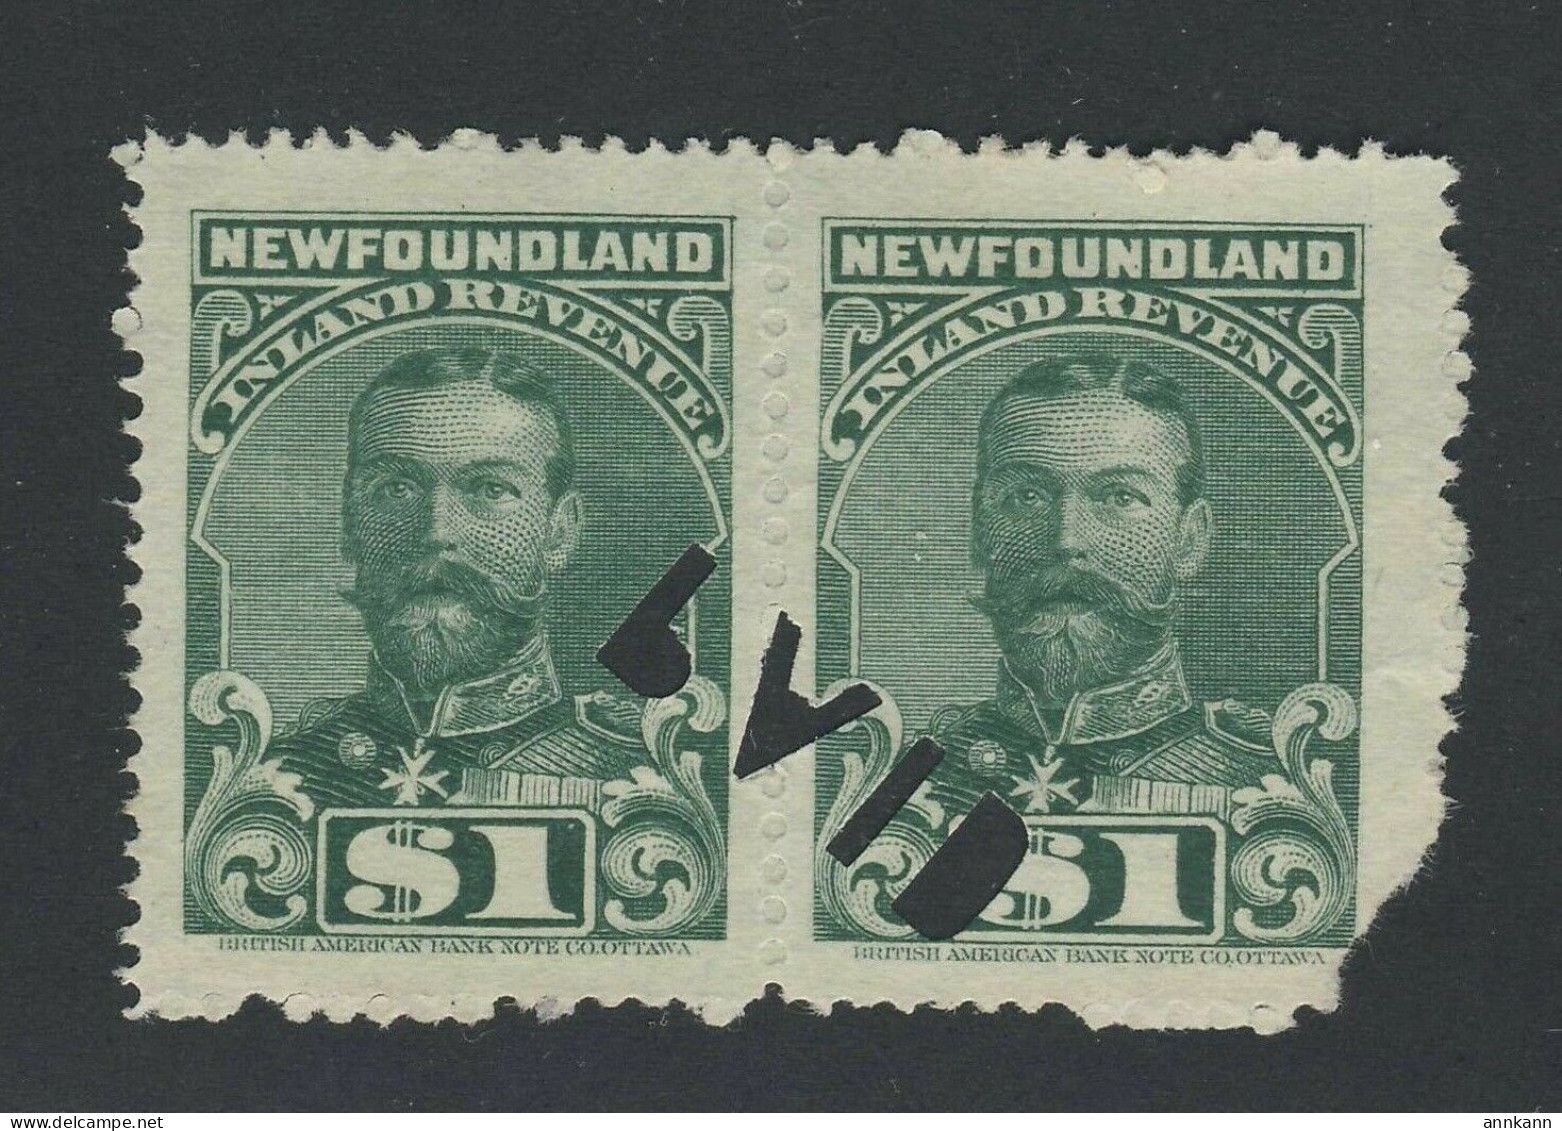 2x Newfoundland Used Inland Revenue Stamps 1910 George V Pair NFR 20-$1.00 - Fiscale Zegels